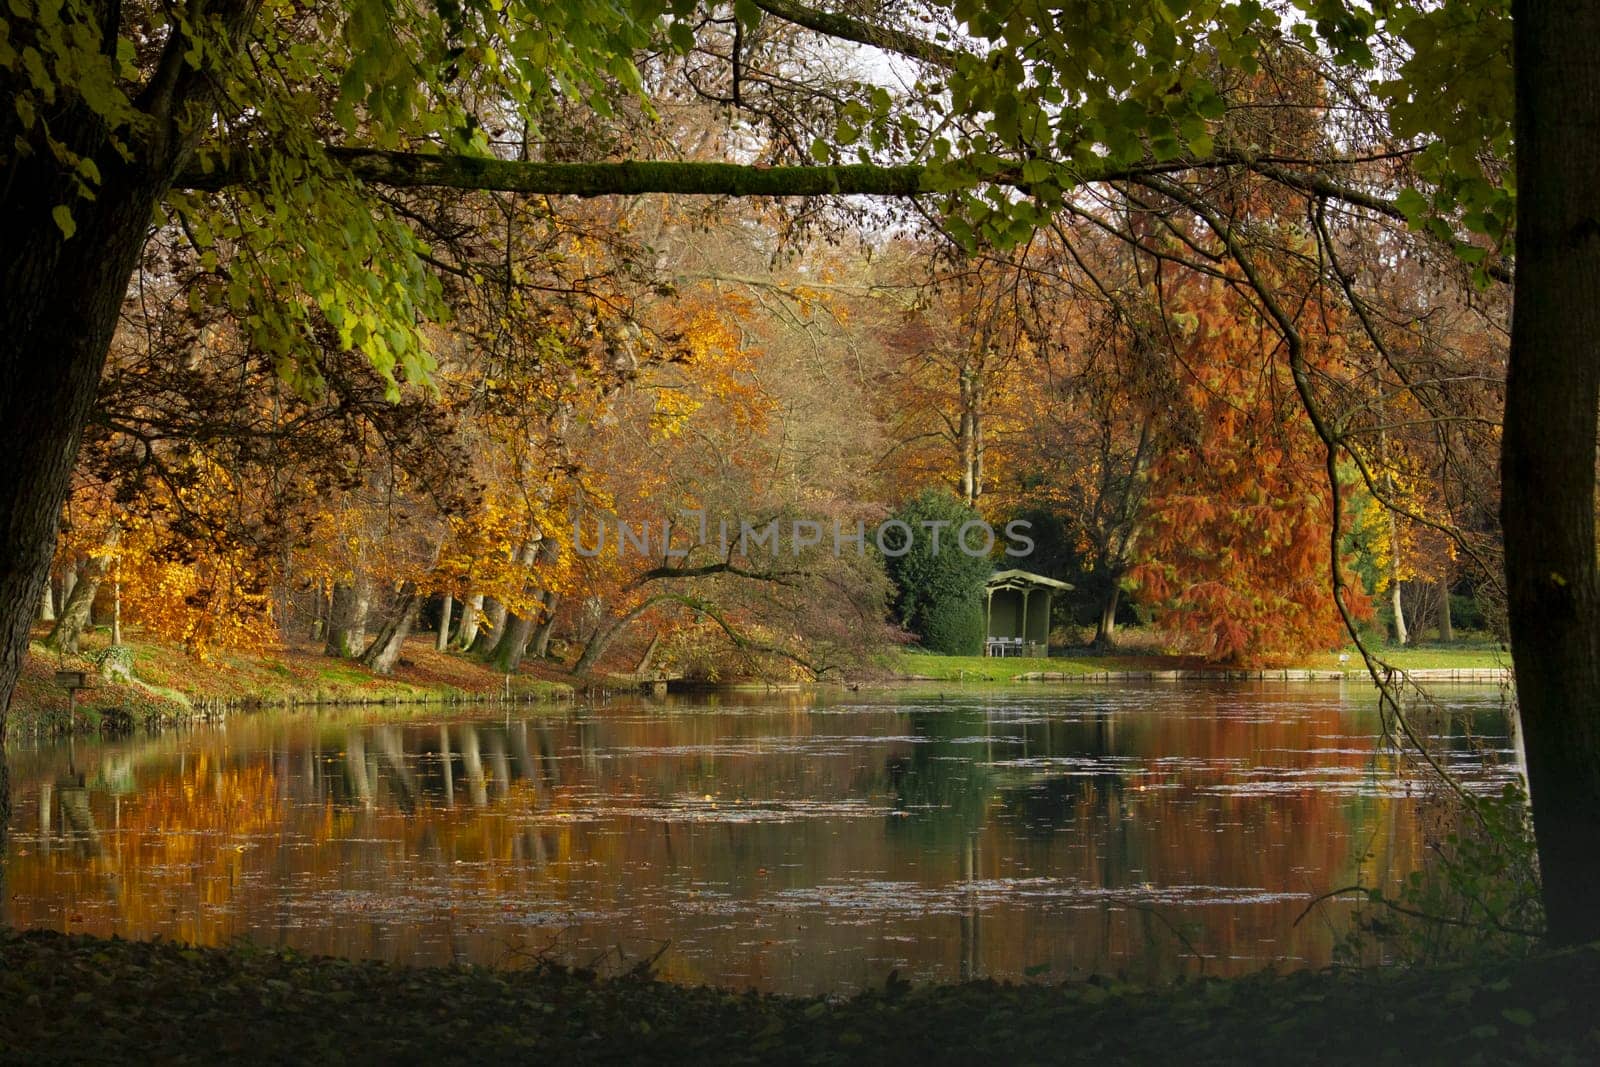 Picturesque autumn scenery with gazebo on the lake shore and colorful trees. High quality photo